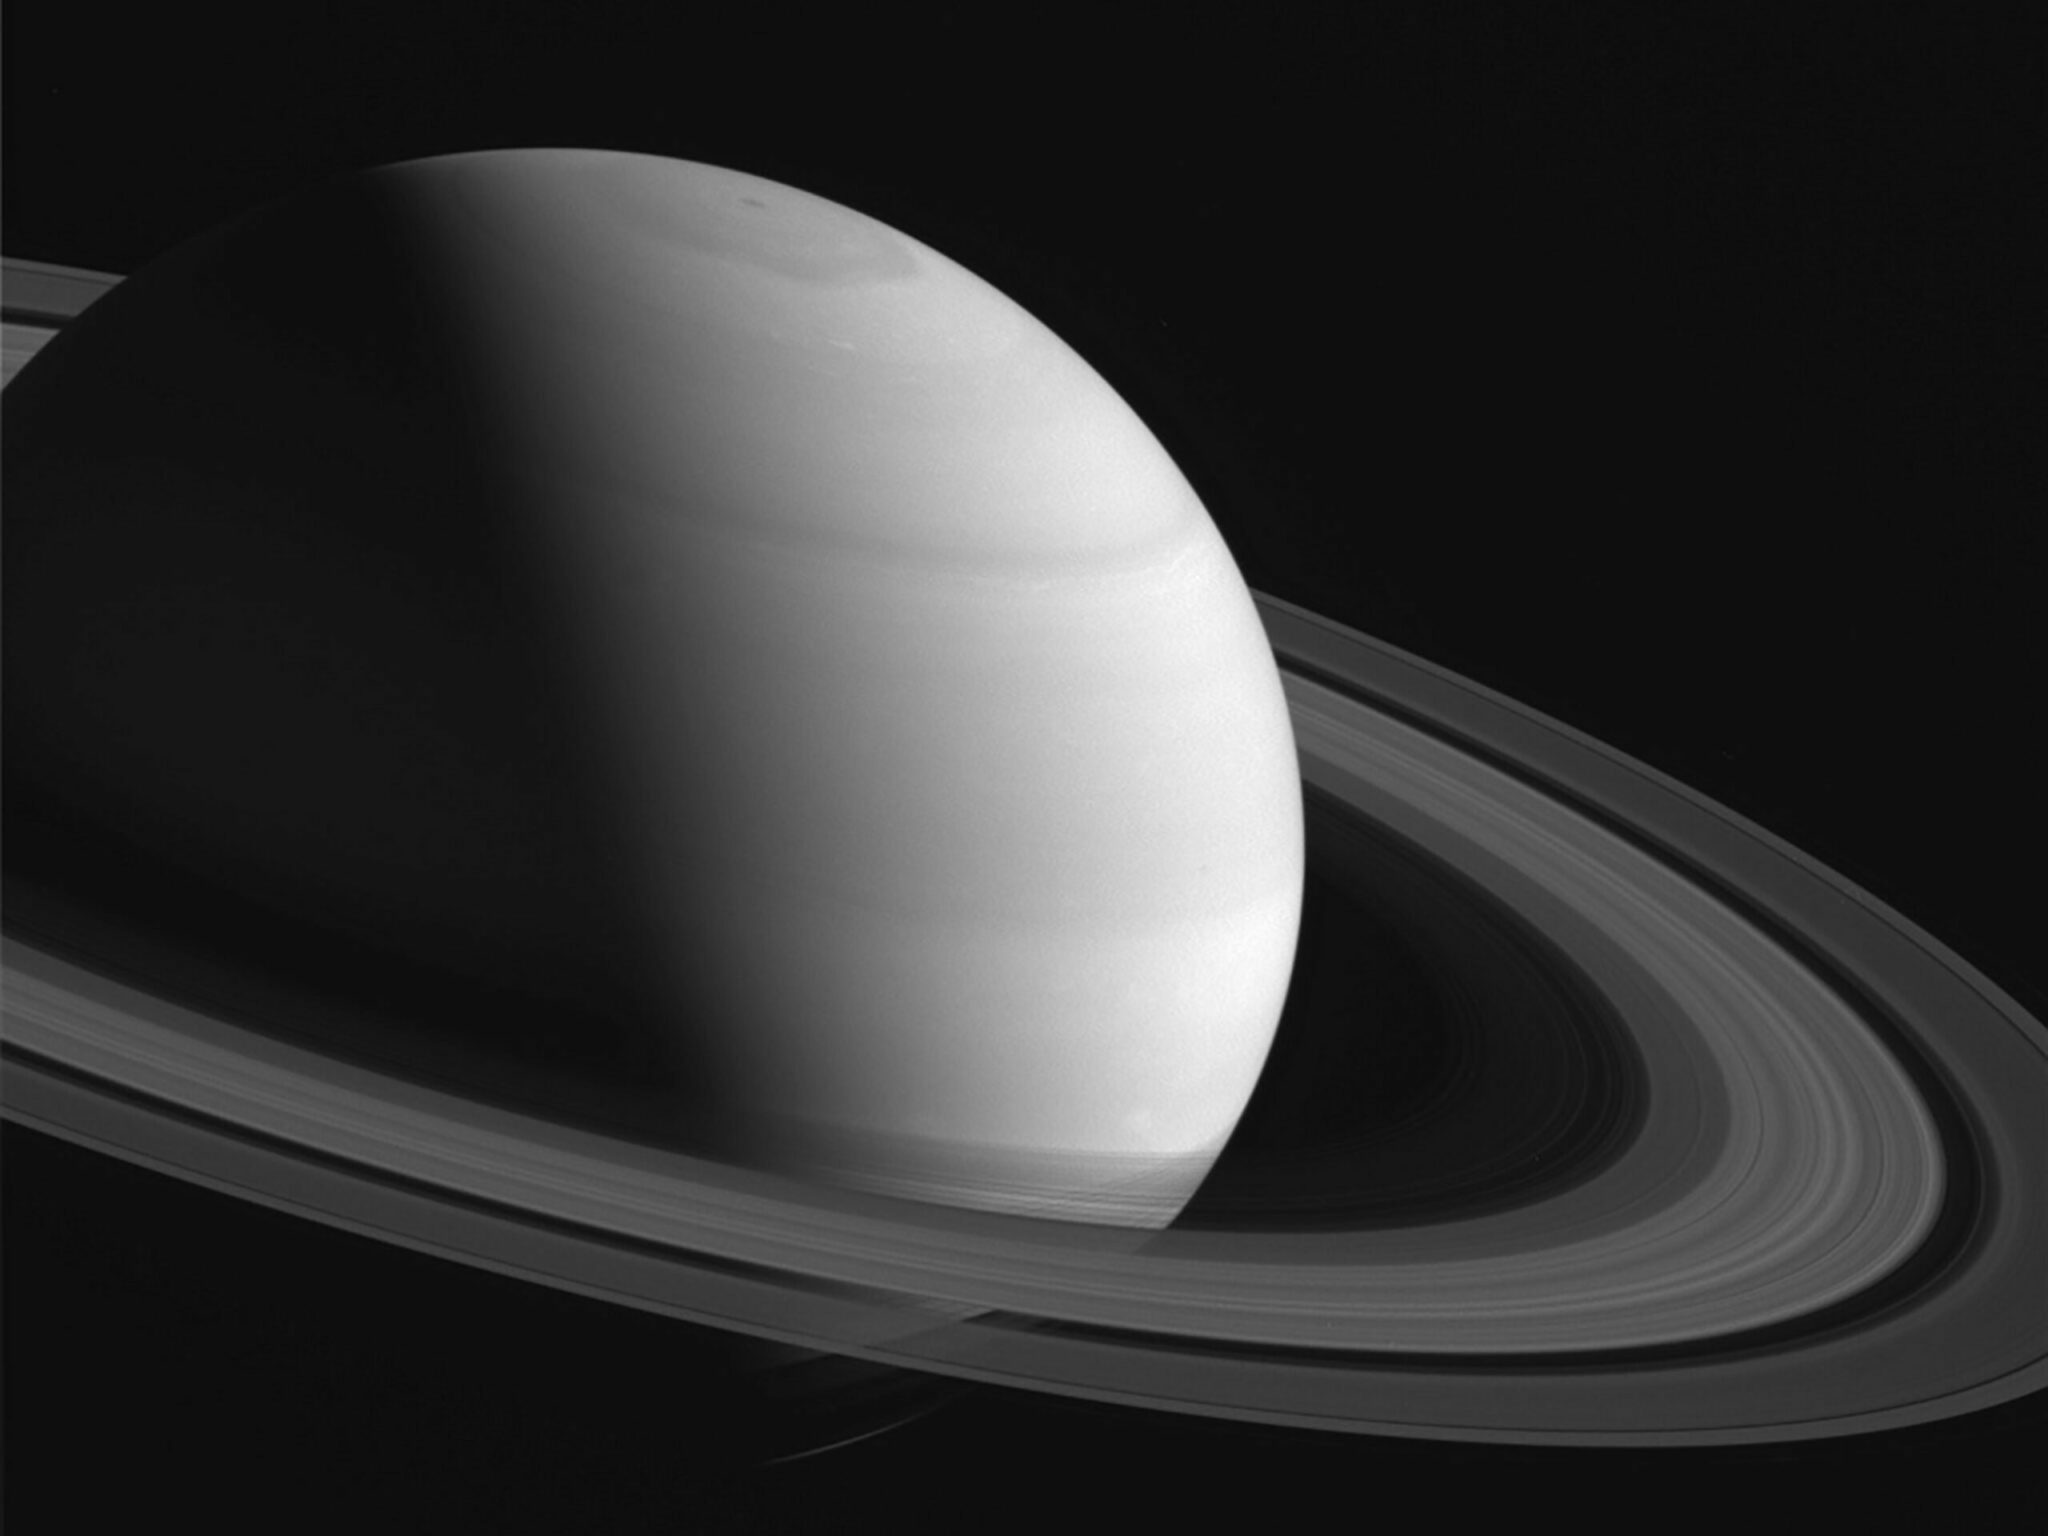 how do saturns planetary rings orbit saturn and which of saturns rings revolve around the planet the fastest scaled